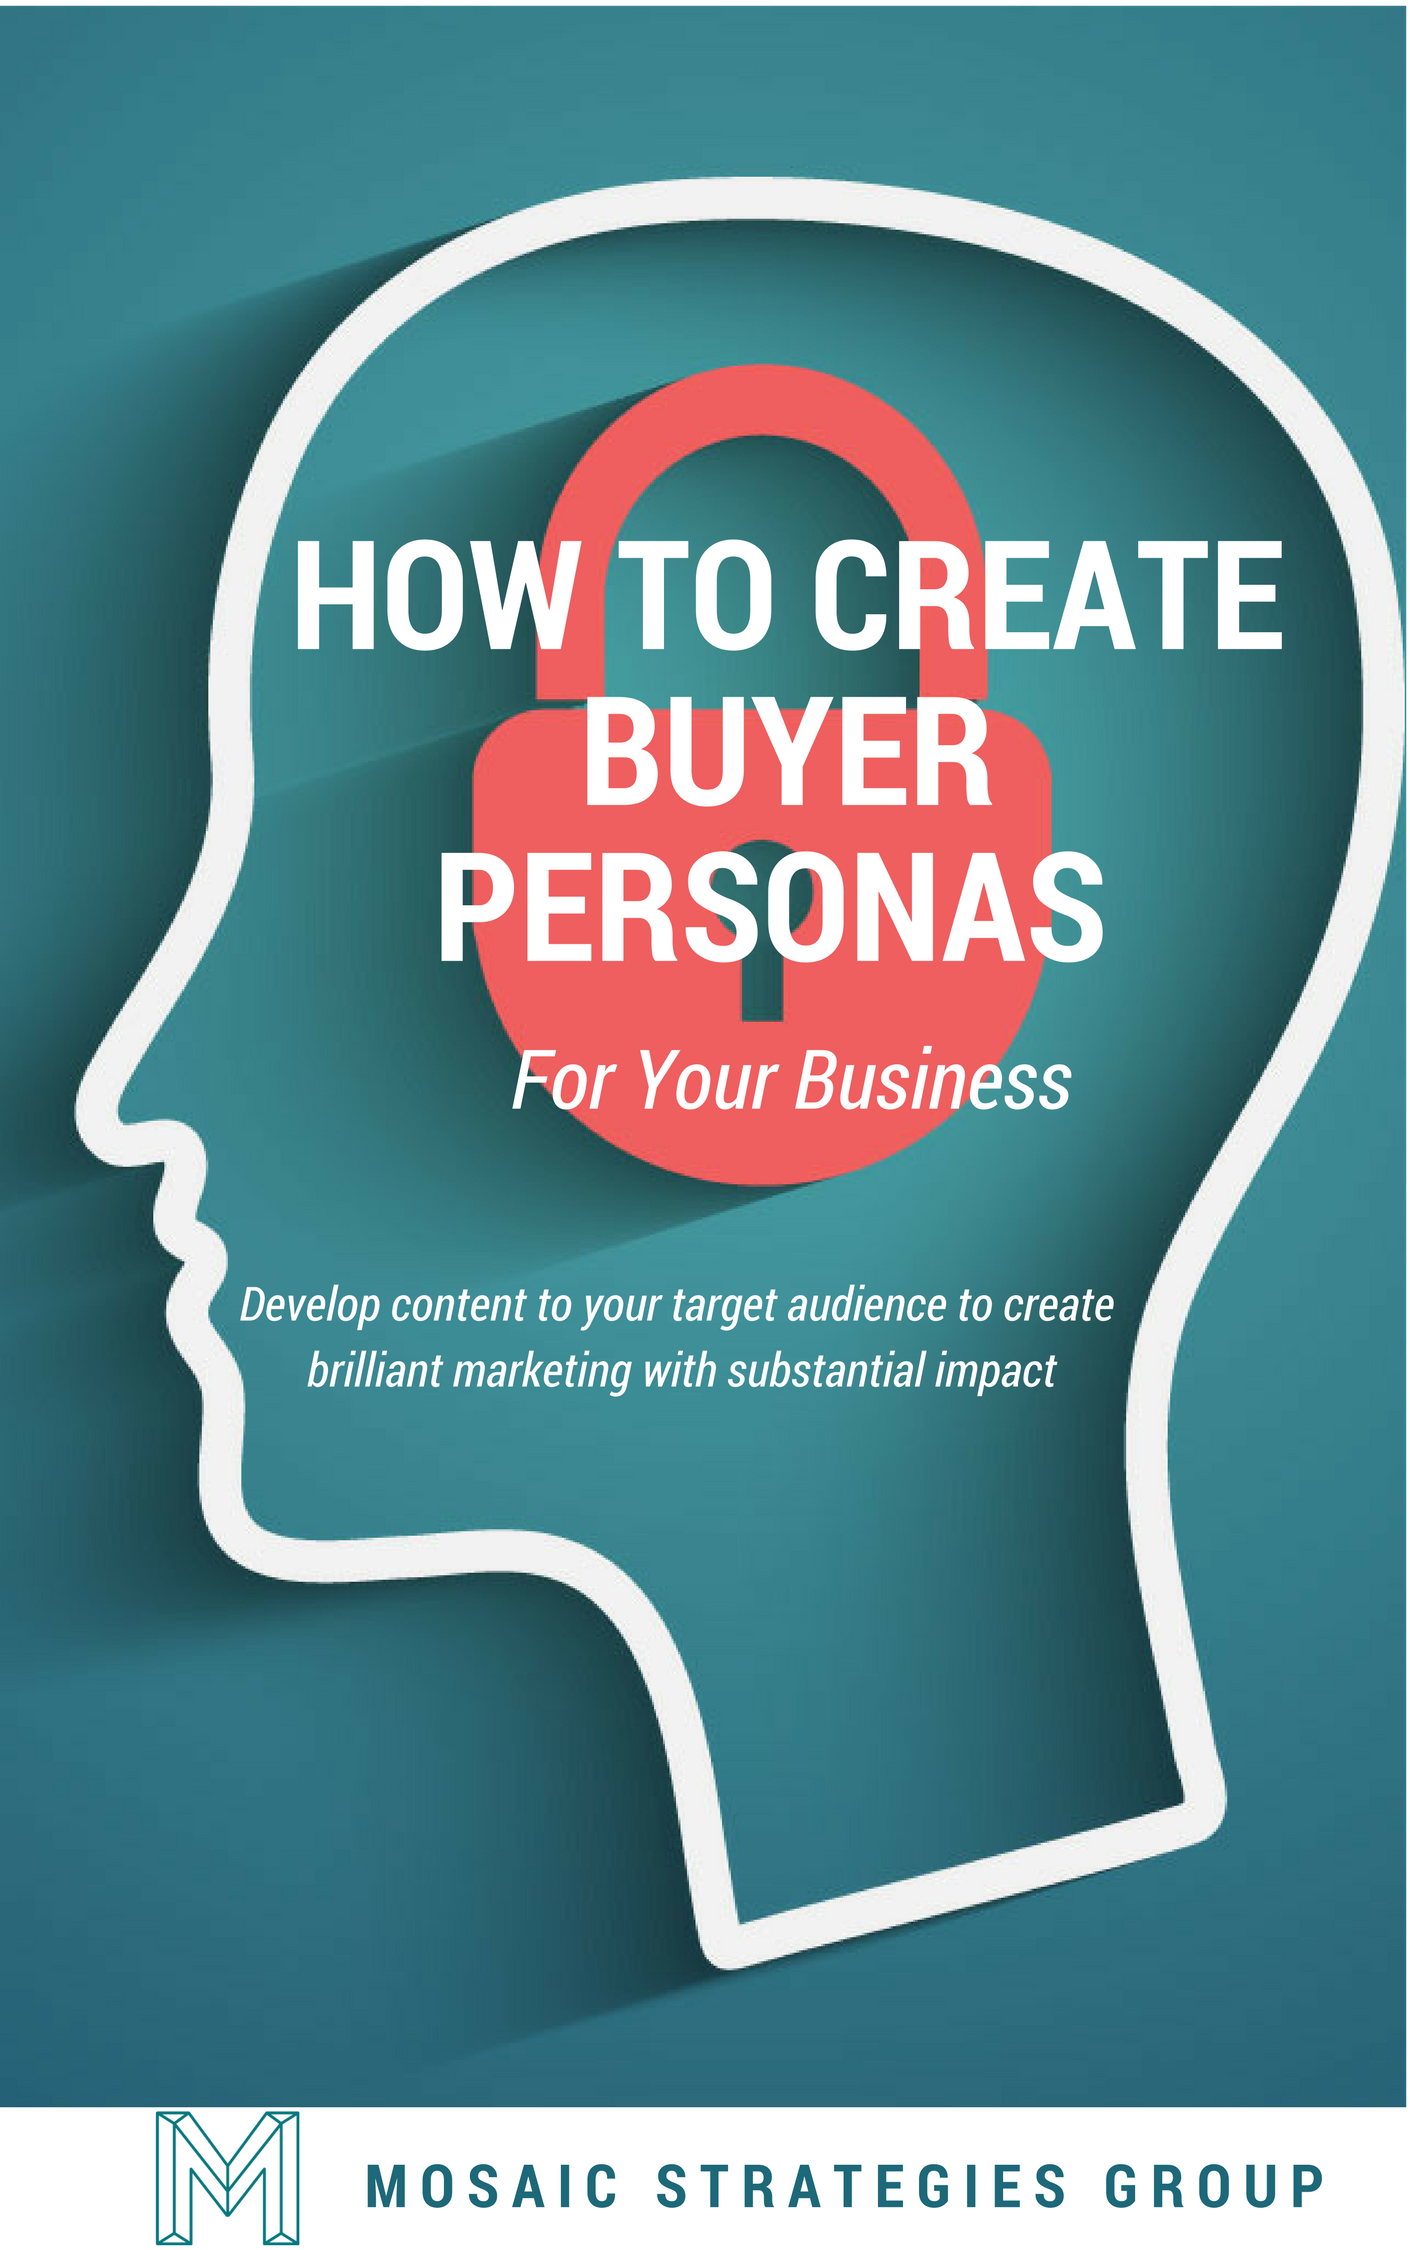 How to create buyer personas ebook cover.png